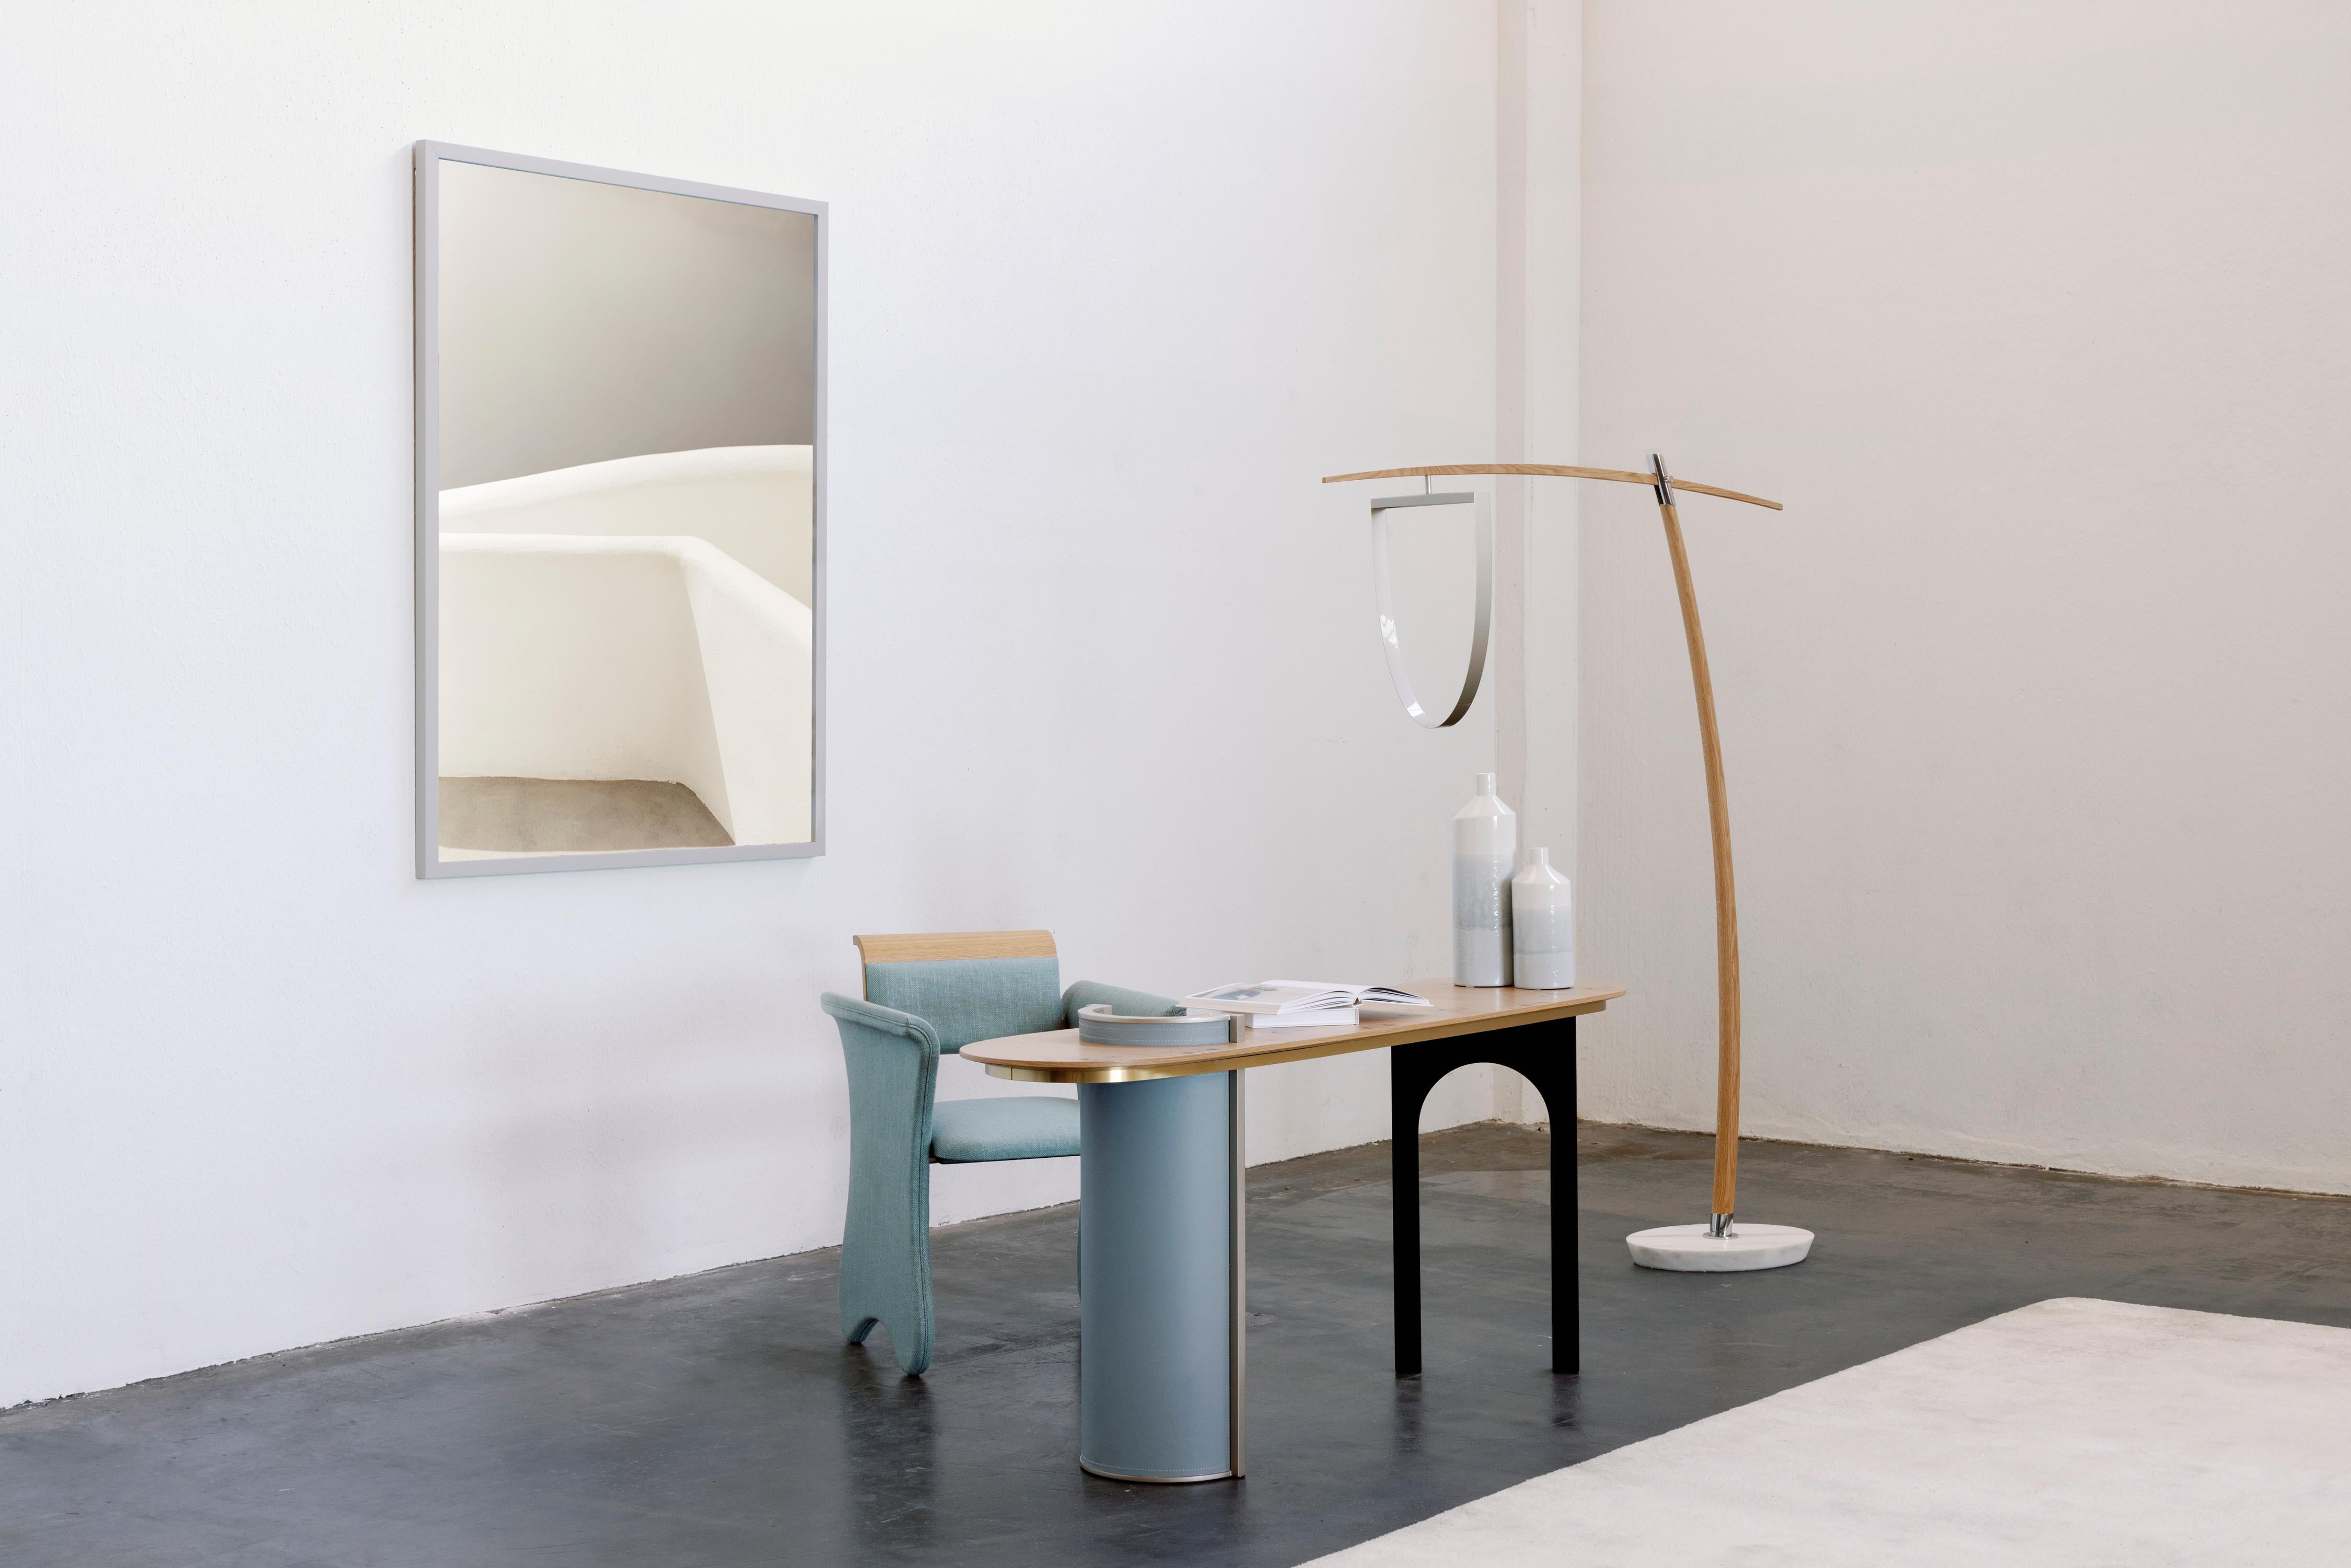 Chiado Console, Contemporary Collection, Handcrafted in Portugal - Europe by Greenapple.

Designed by Rute Maertins for the Modern Collection, the Chiado console table honors Lisbon’s historic quarter, capturing the essence of its artistic life and